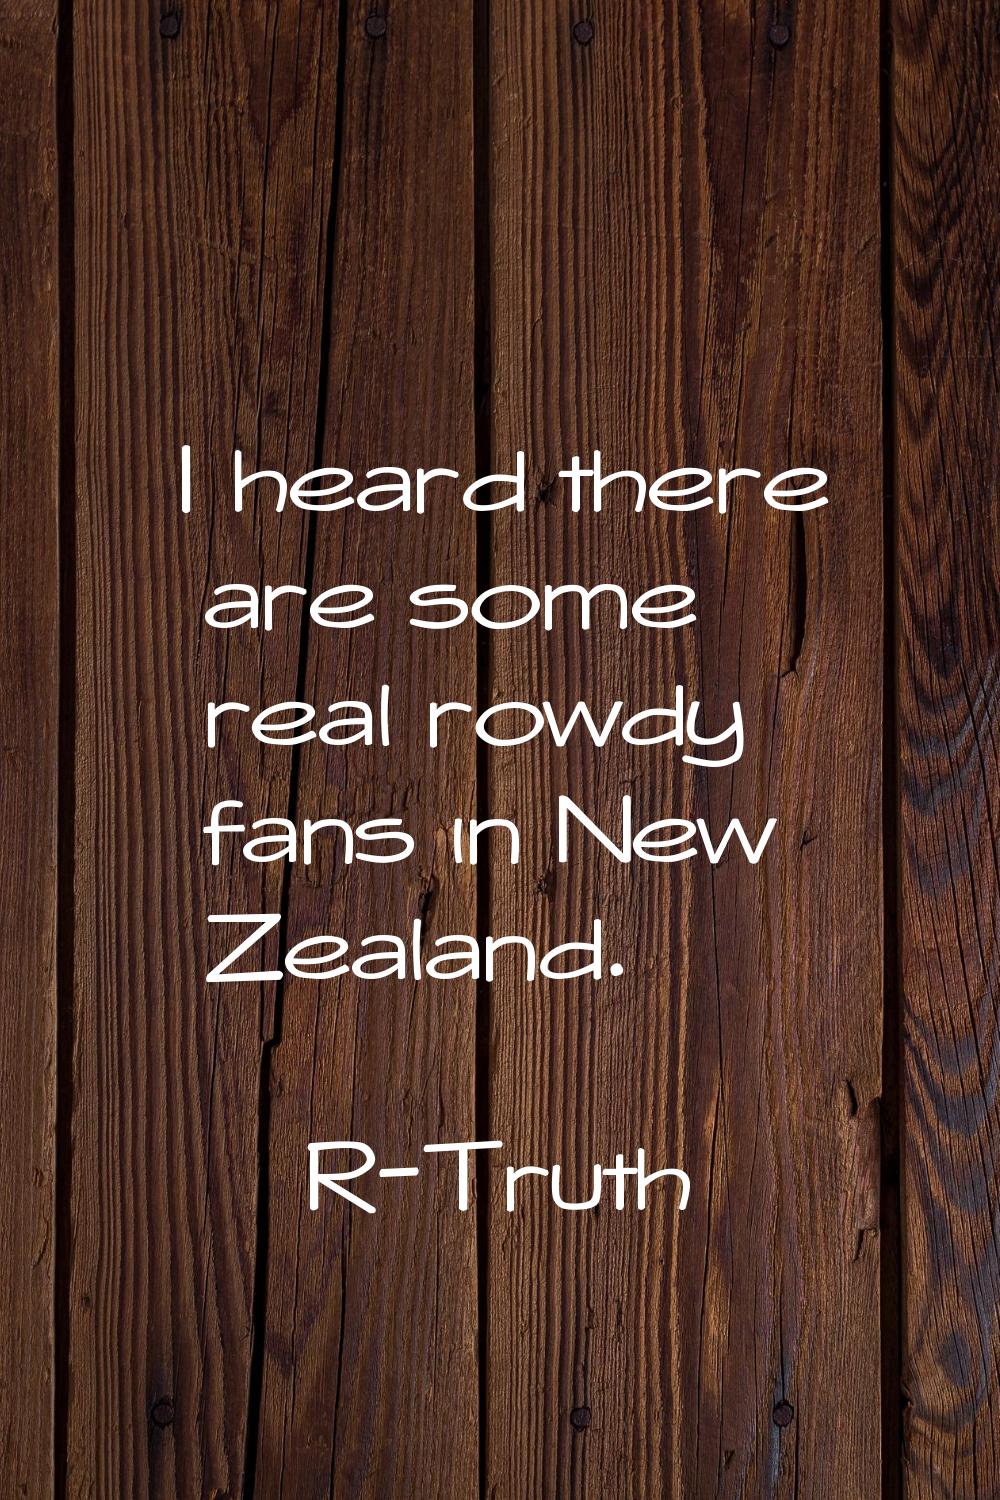 I heard there are some real rowdy fans in New Zealand.